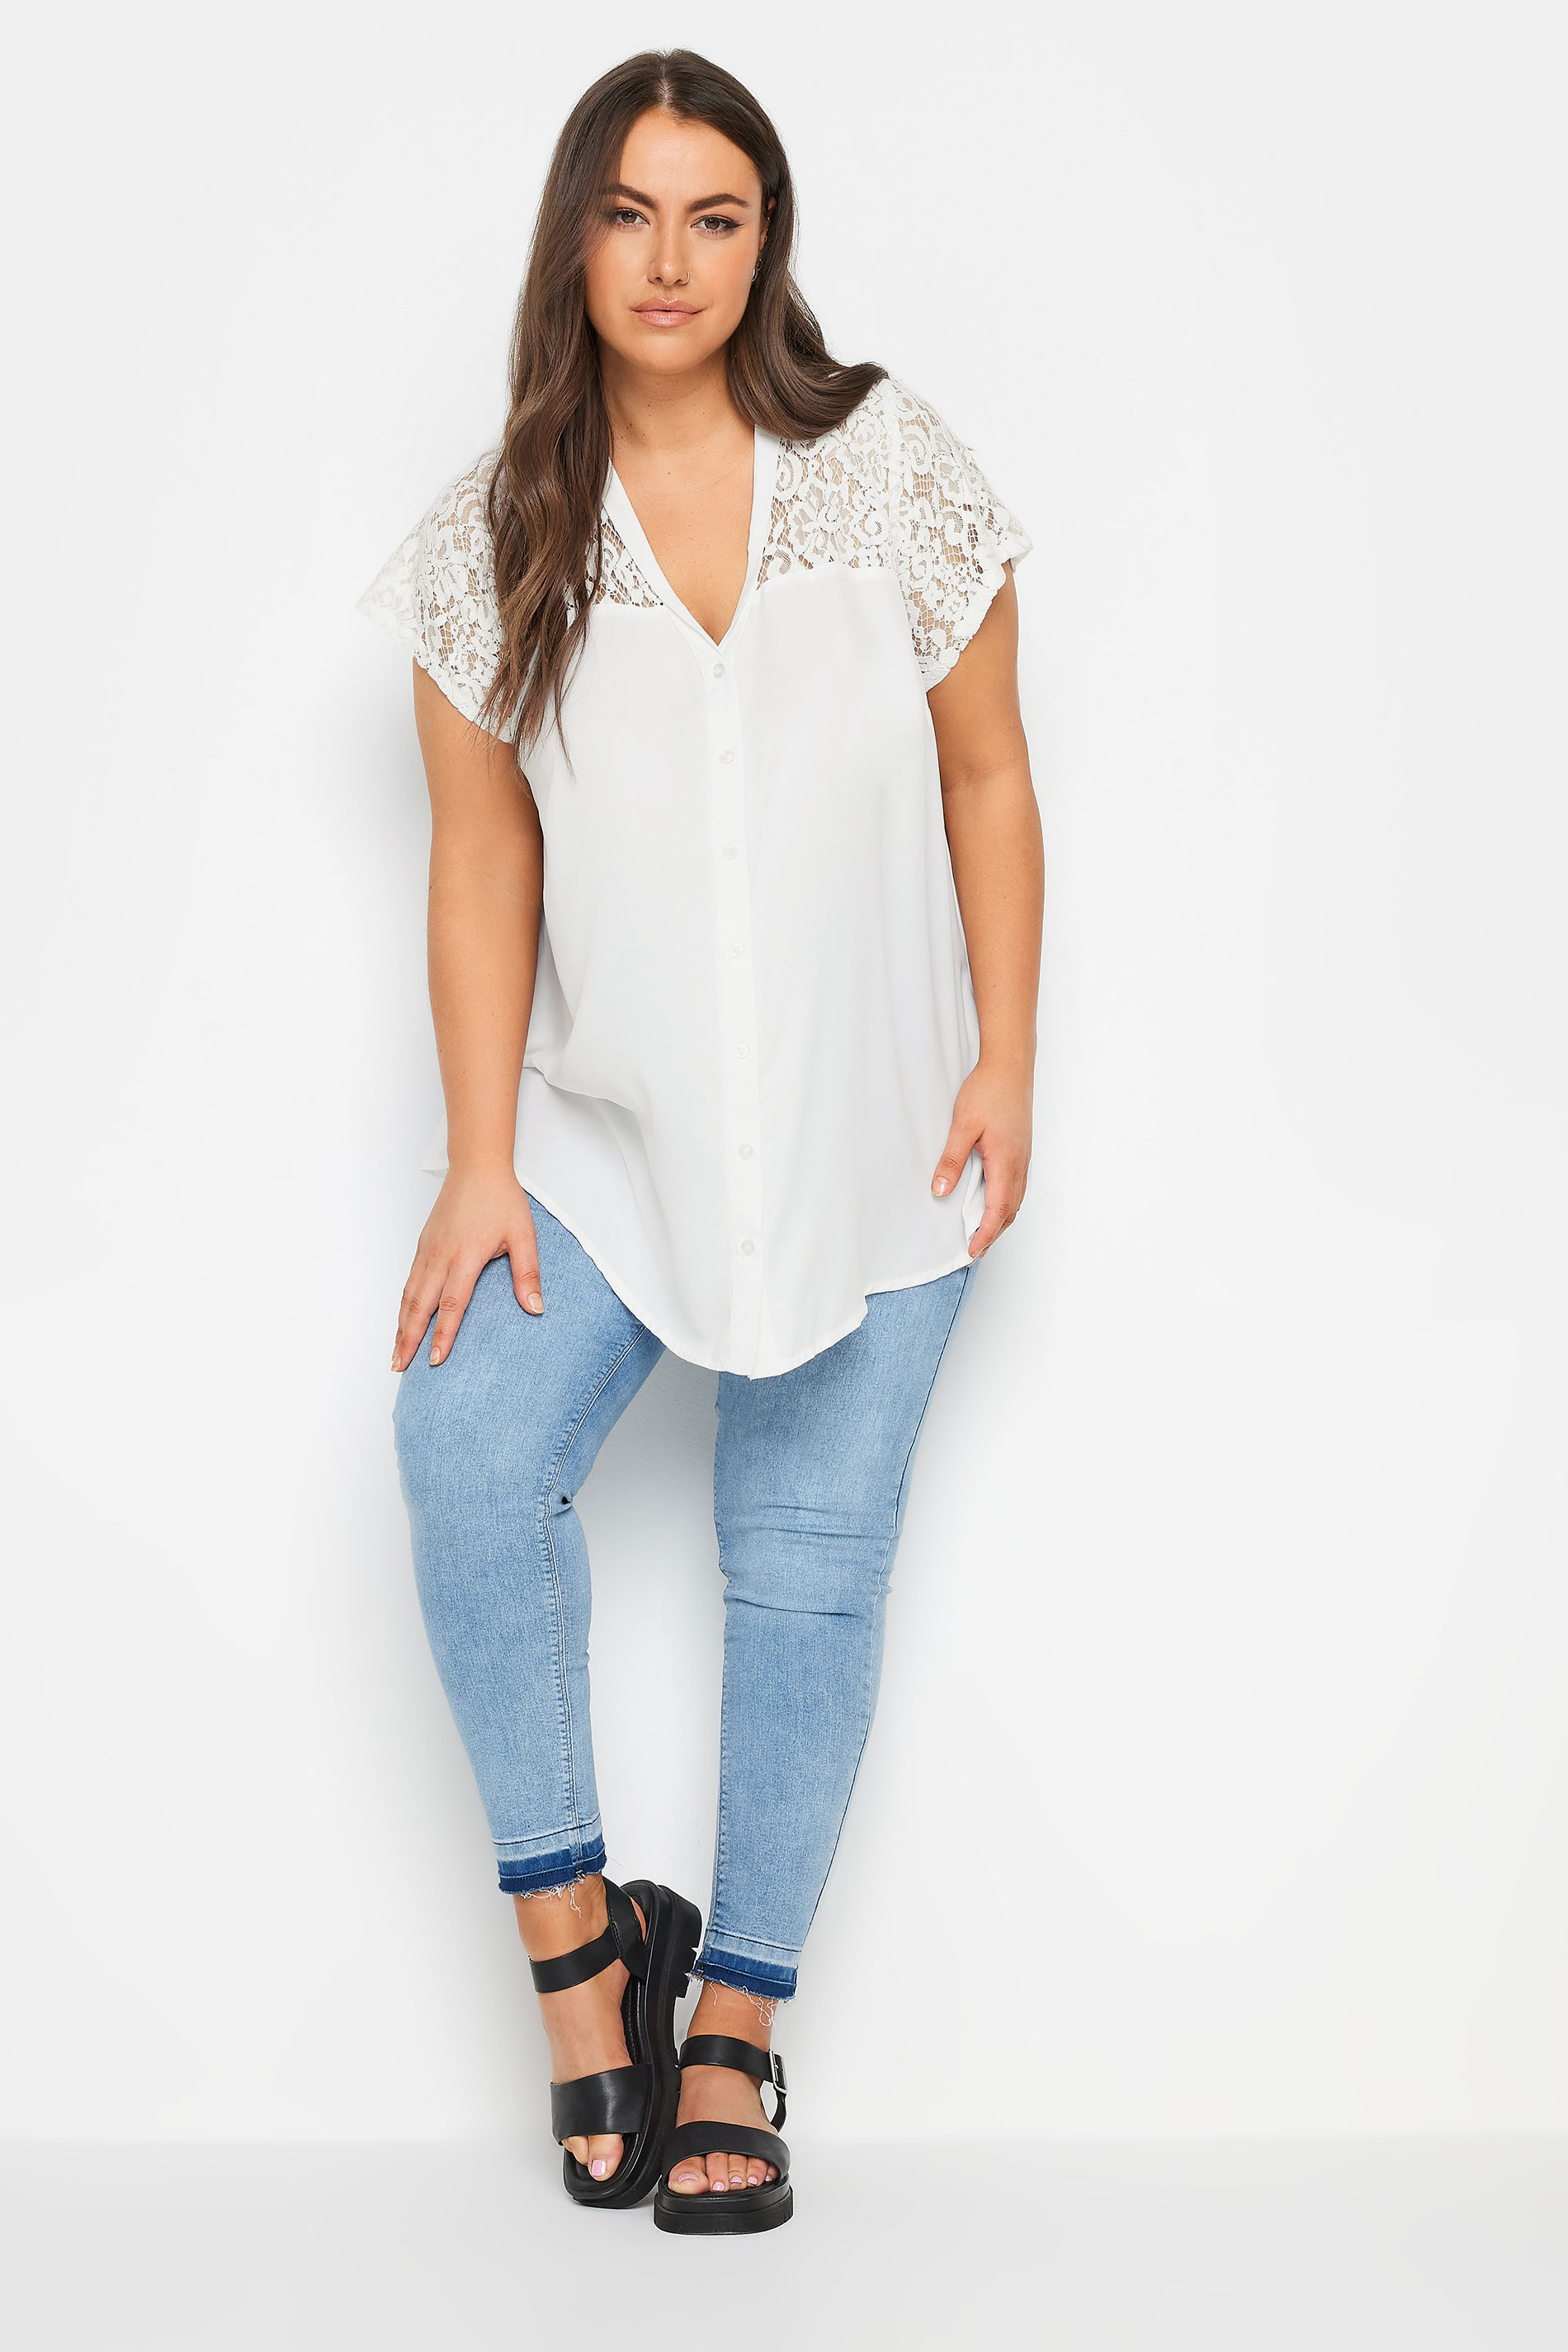 YOURS Plus Size White Lace Insert Blouse | Yours Clothing 2